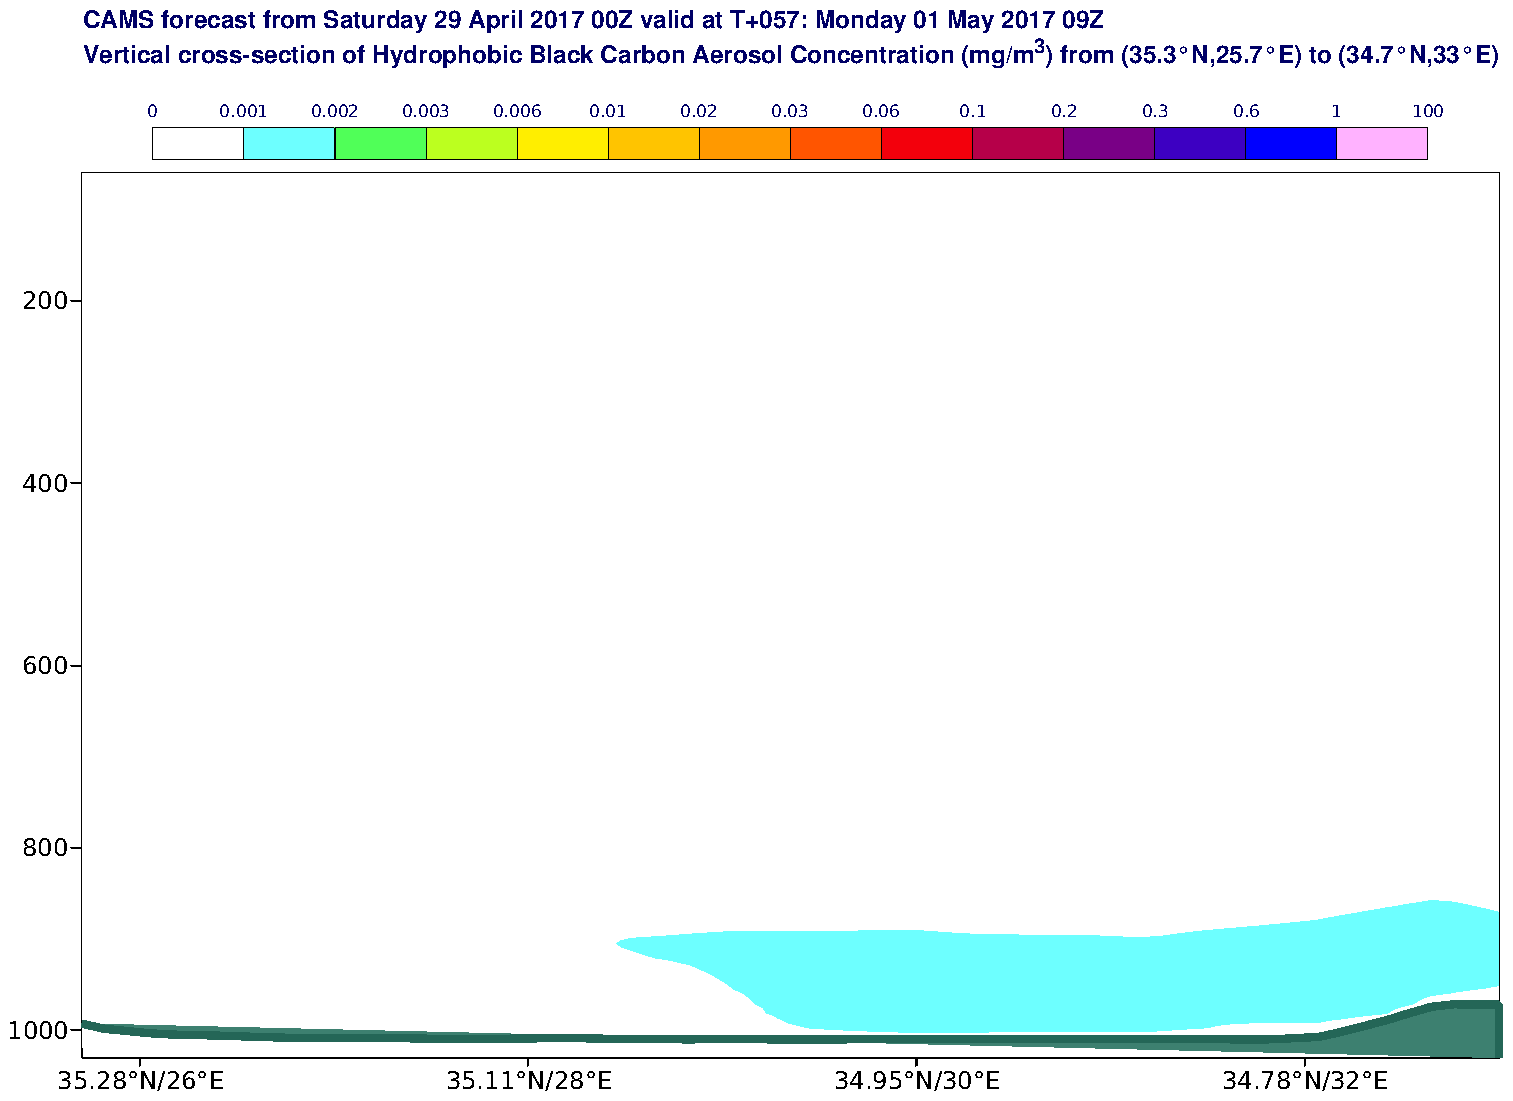 Vertical cross-section of Hydrophobic Black Carbon Aerosol Concentration (mg/m3) valid at T57 - 2017-05-01 09:00